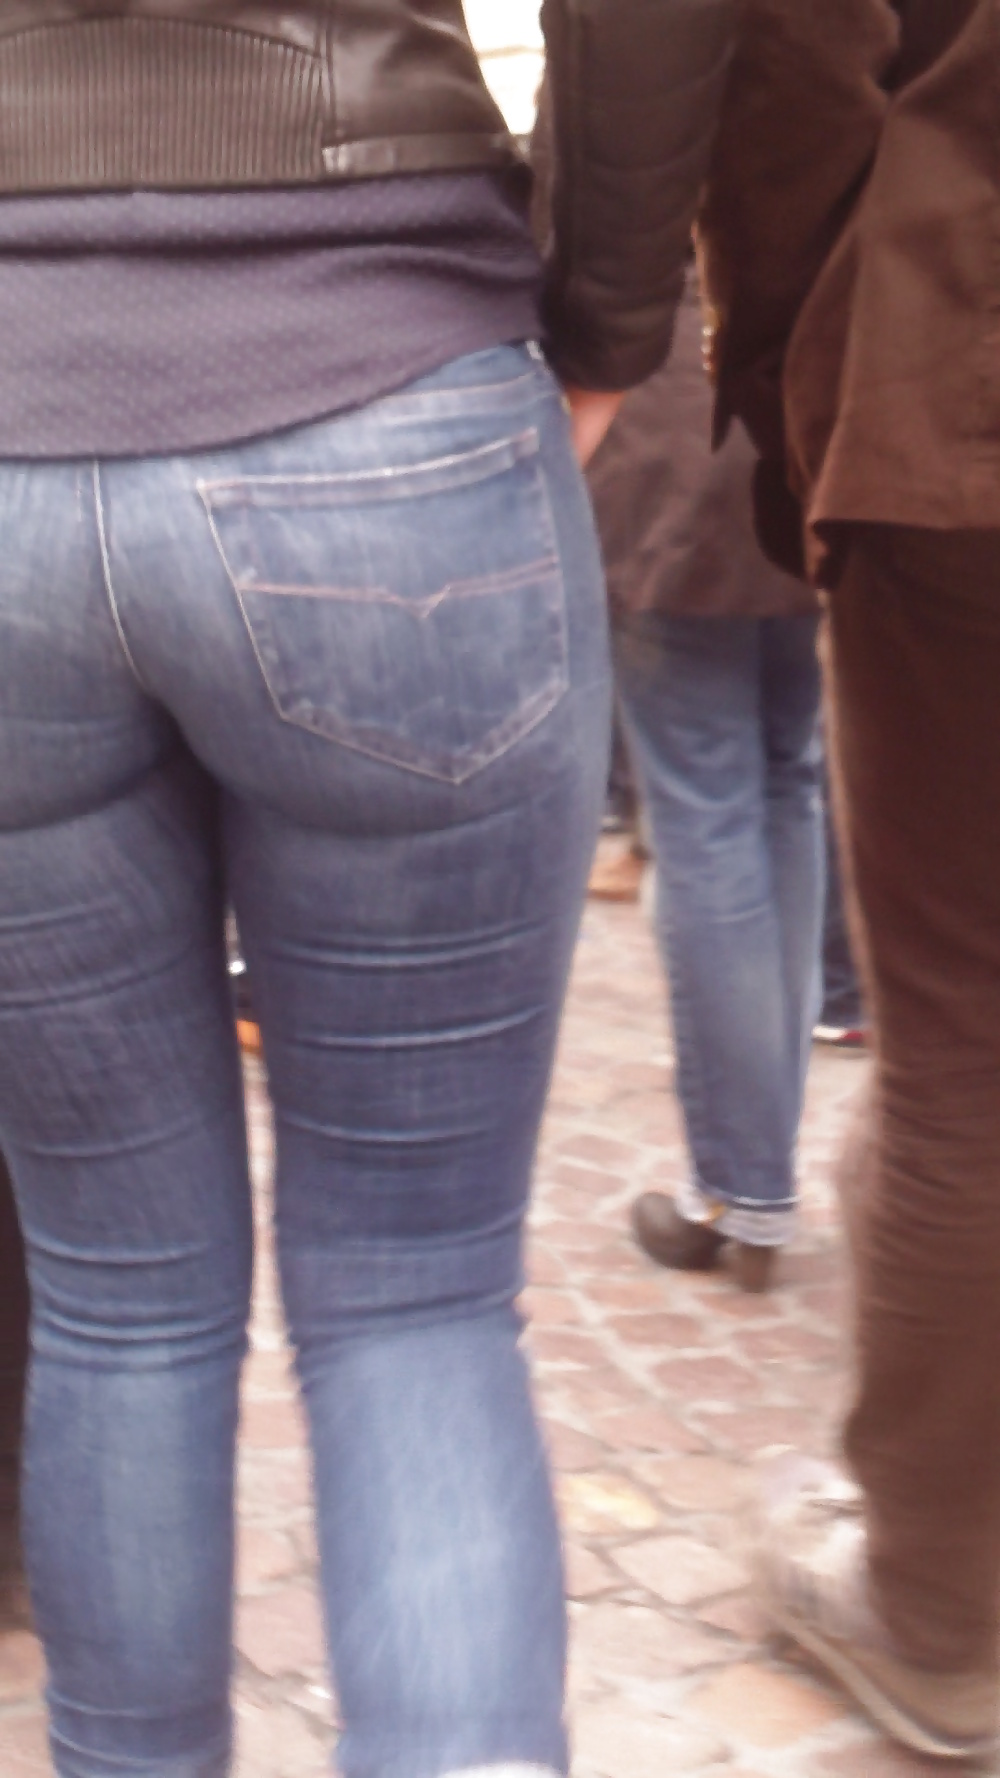 Nice big juicy teen ass & butt in very tight blue jeans  #31832247